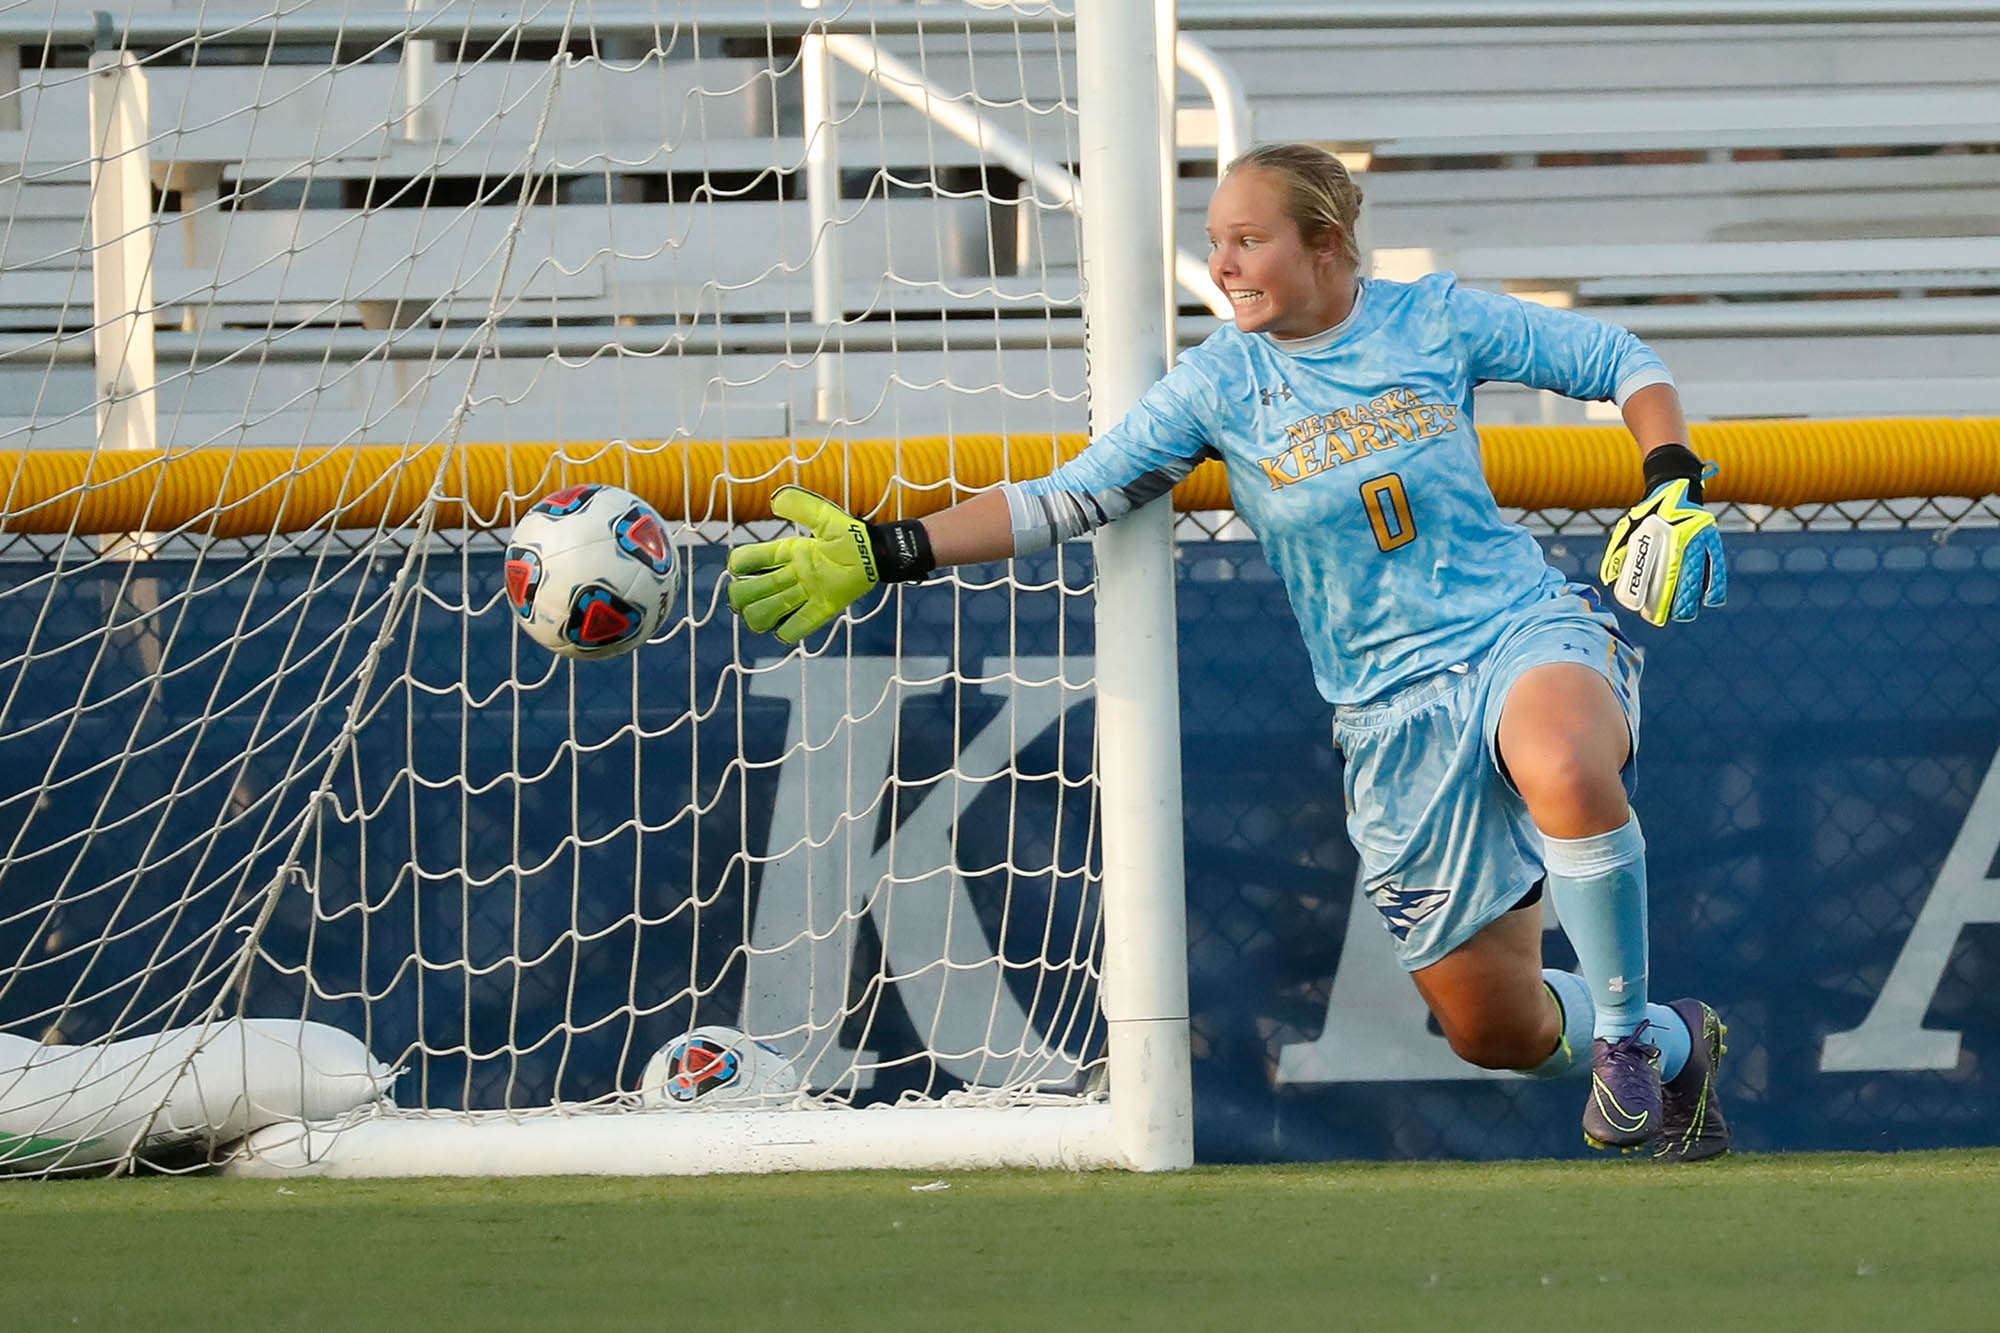 Allie Prososki entered the 2019 season with the best goals against average (1.13) in UNK history. She’s recorded a school-record 13 individual shutouts, and her 13 career wins, 208 saves, .836 save percentage and 40 starts at goalie all rank second all-time at UNK. (Photos by Corbey R. Dorsey, UNK Communications)